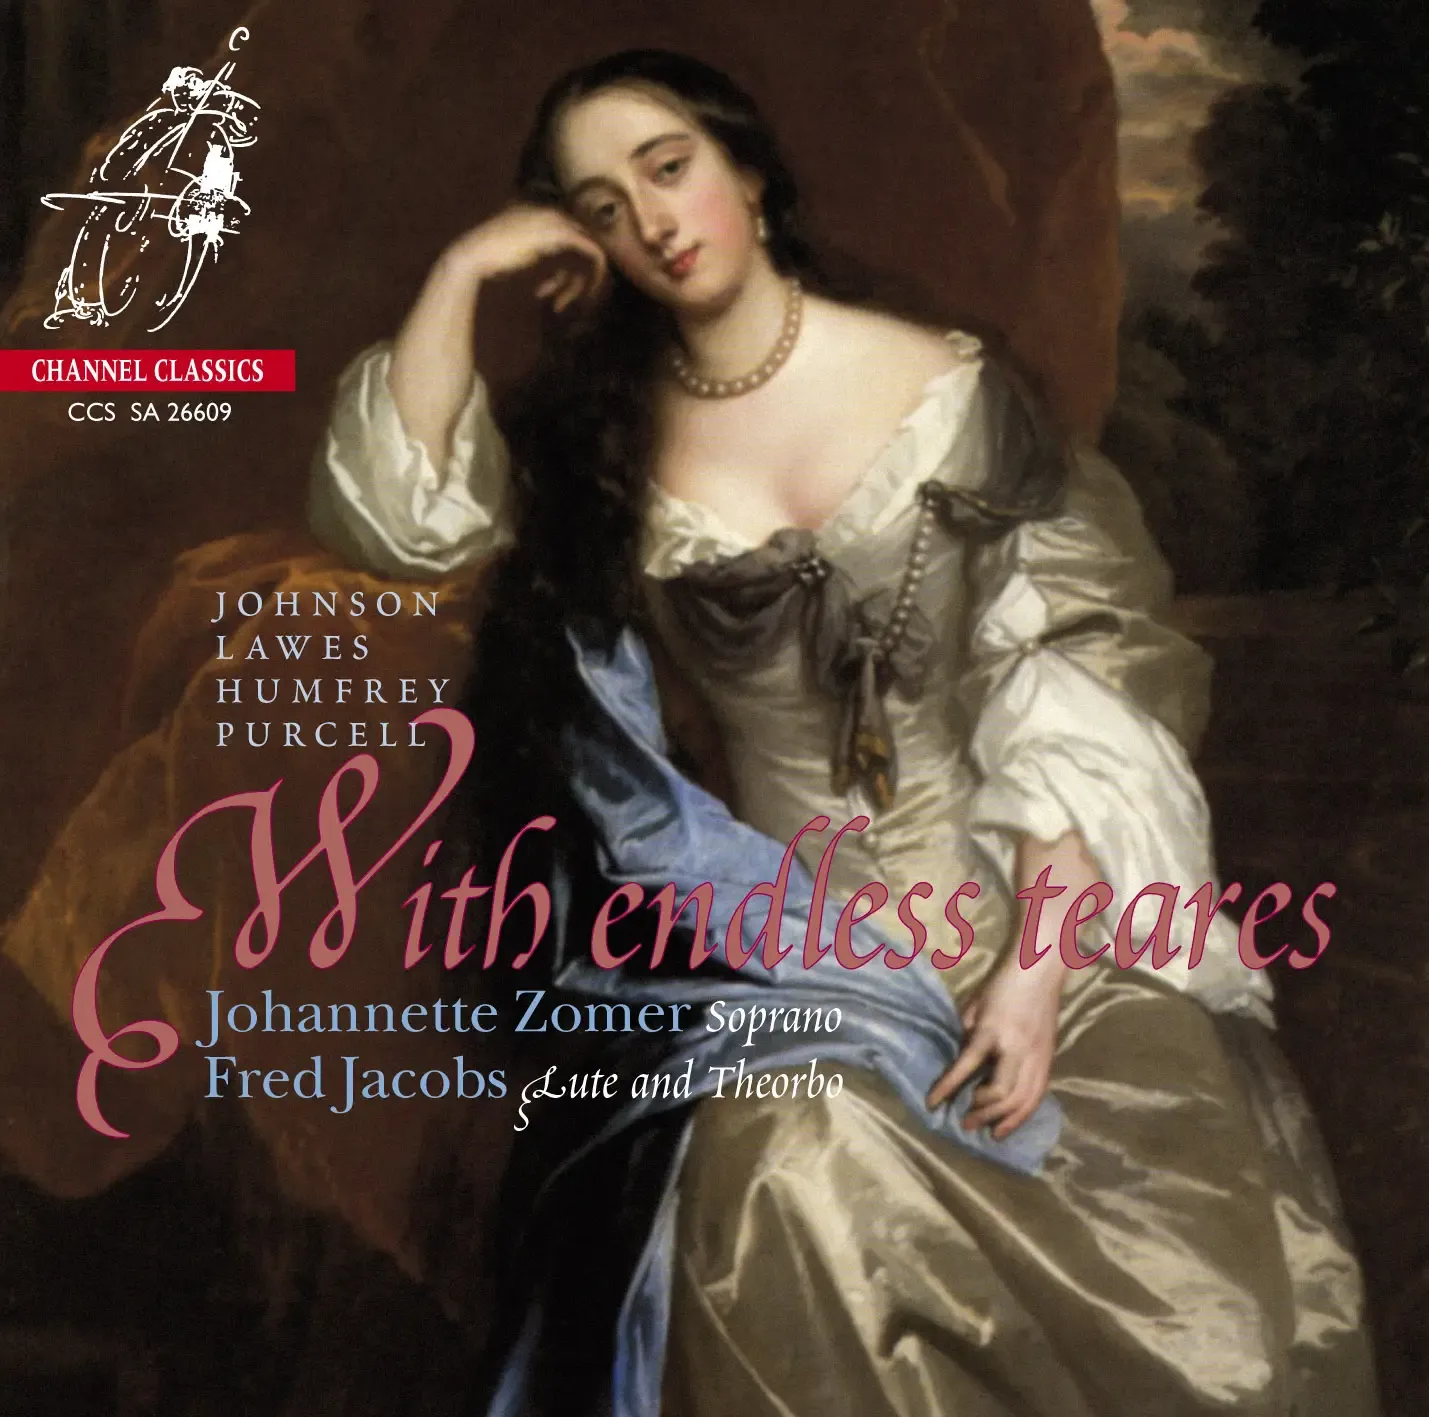 Johannette Zomer, Fred Jacobs – With Endless Teares (2009) MCH SACD ISO + DSF DSD64 + Hi-Res FLAC